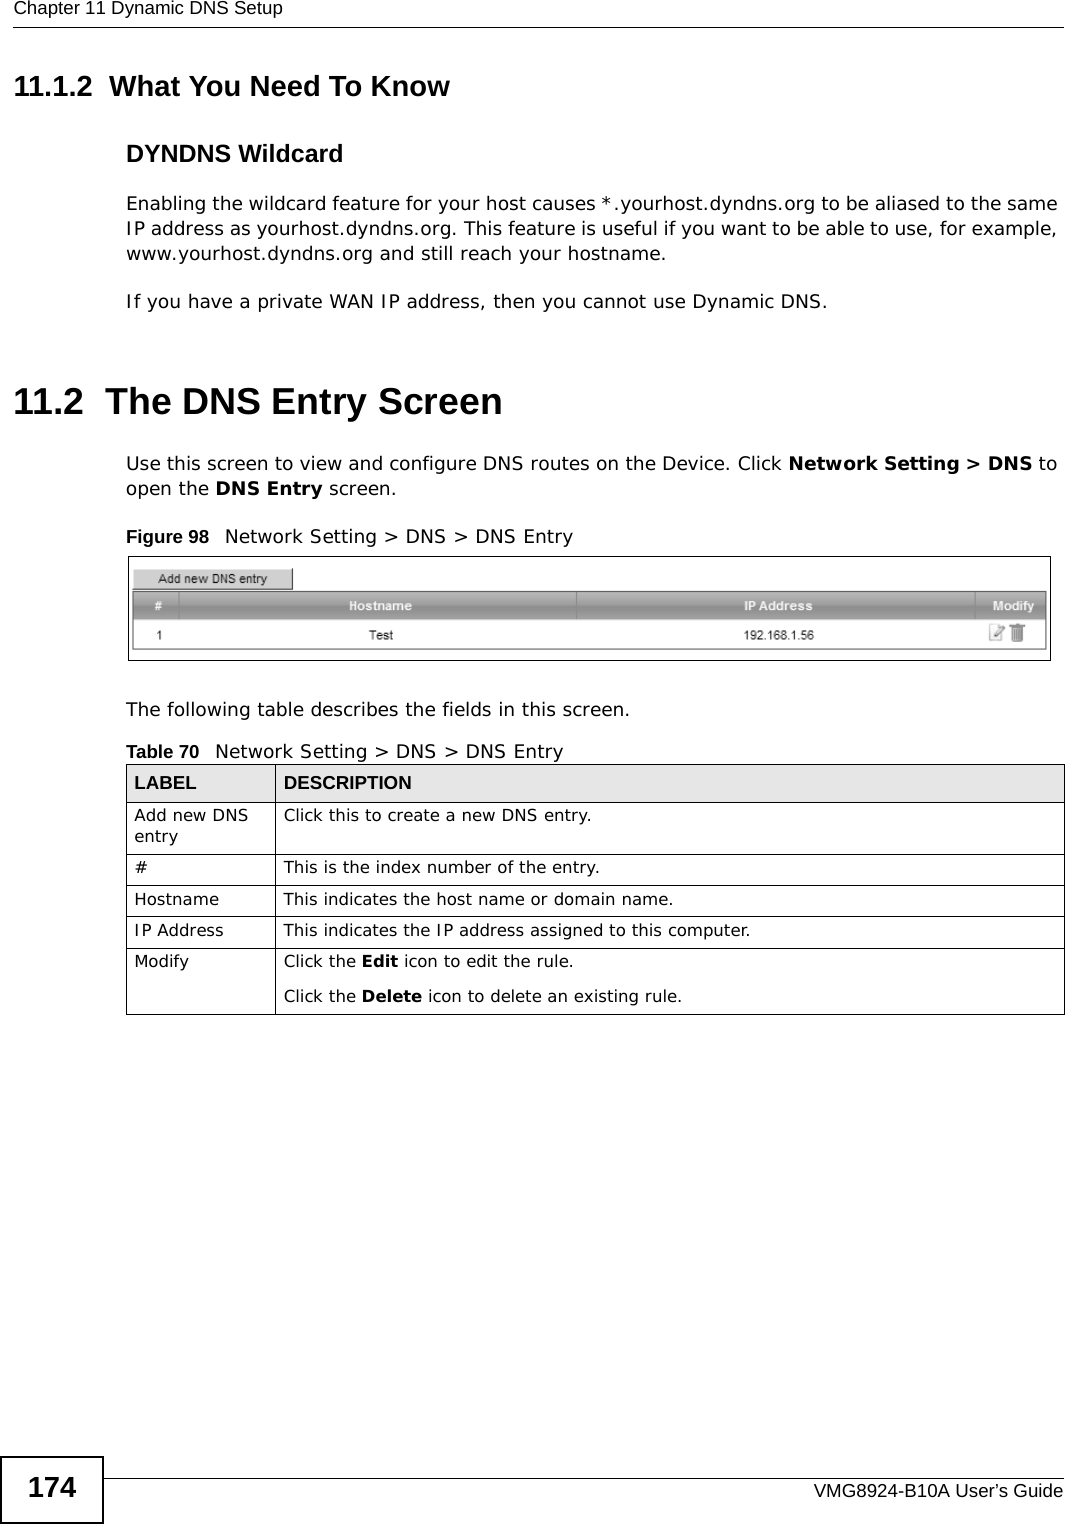 Chapter 11 Dynamic DNS SetupVMG8924-B10A User’s Guide17411.1.2  What You Need To KnowDYNDNS WildcardEnabling the wildcard feature for your host causes *.yourhost.dyndns.org to be aliased to the same IP address as yourhost.dyndns.org. This feature is useful if you want to be able to use, for example, www.yourhost.dyndns.org and still reach your hostname.If you have a private WAN IP address, then you cannot use Dynamic DNS.11.2  The DNS Entry ScreenUse this screen to view and configure DNS routes on the Device. Click Network Setting &gt; DNS to open the DNS Entry screen.Figure 98   Network Setting &gt; DNS &gt; DNS EntryThe following table describes the fields in this screen. Table 70   Network Setting &gt; DNS &gt; DNS EntryLABEL DESCRIPTIONAdd new DNS entry Click this to create a new DNS entry.#This is the index number of the entry.Hostname This indicates the host name or domain name.IP Address This indicates the IP address assigned to this computer.Modify Click the Edit icon to edit the rule.Click the Delete icon to delete an existing rule.